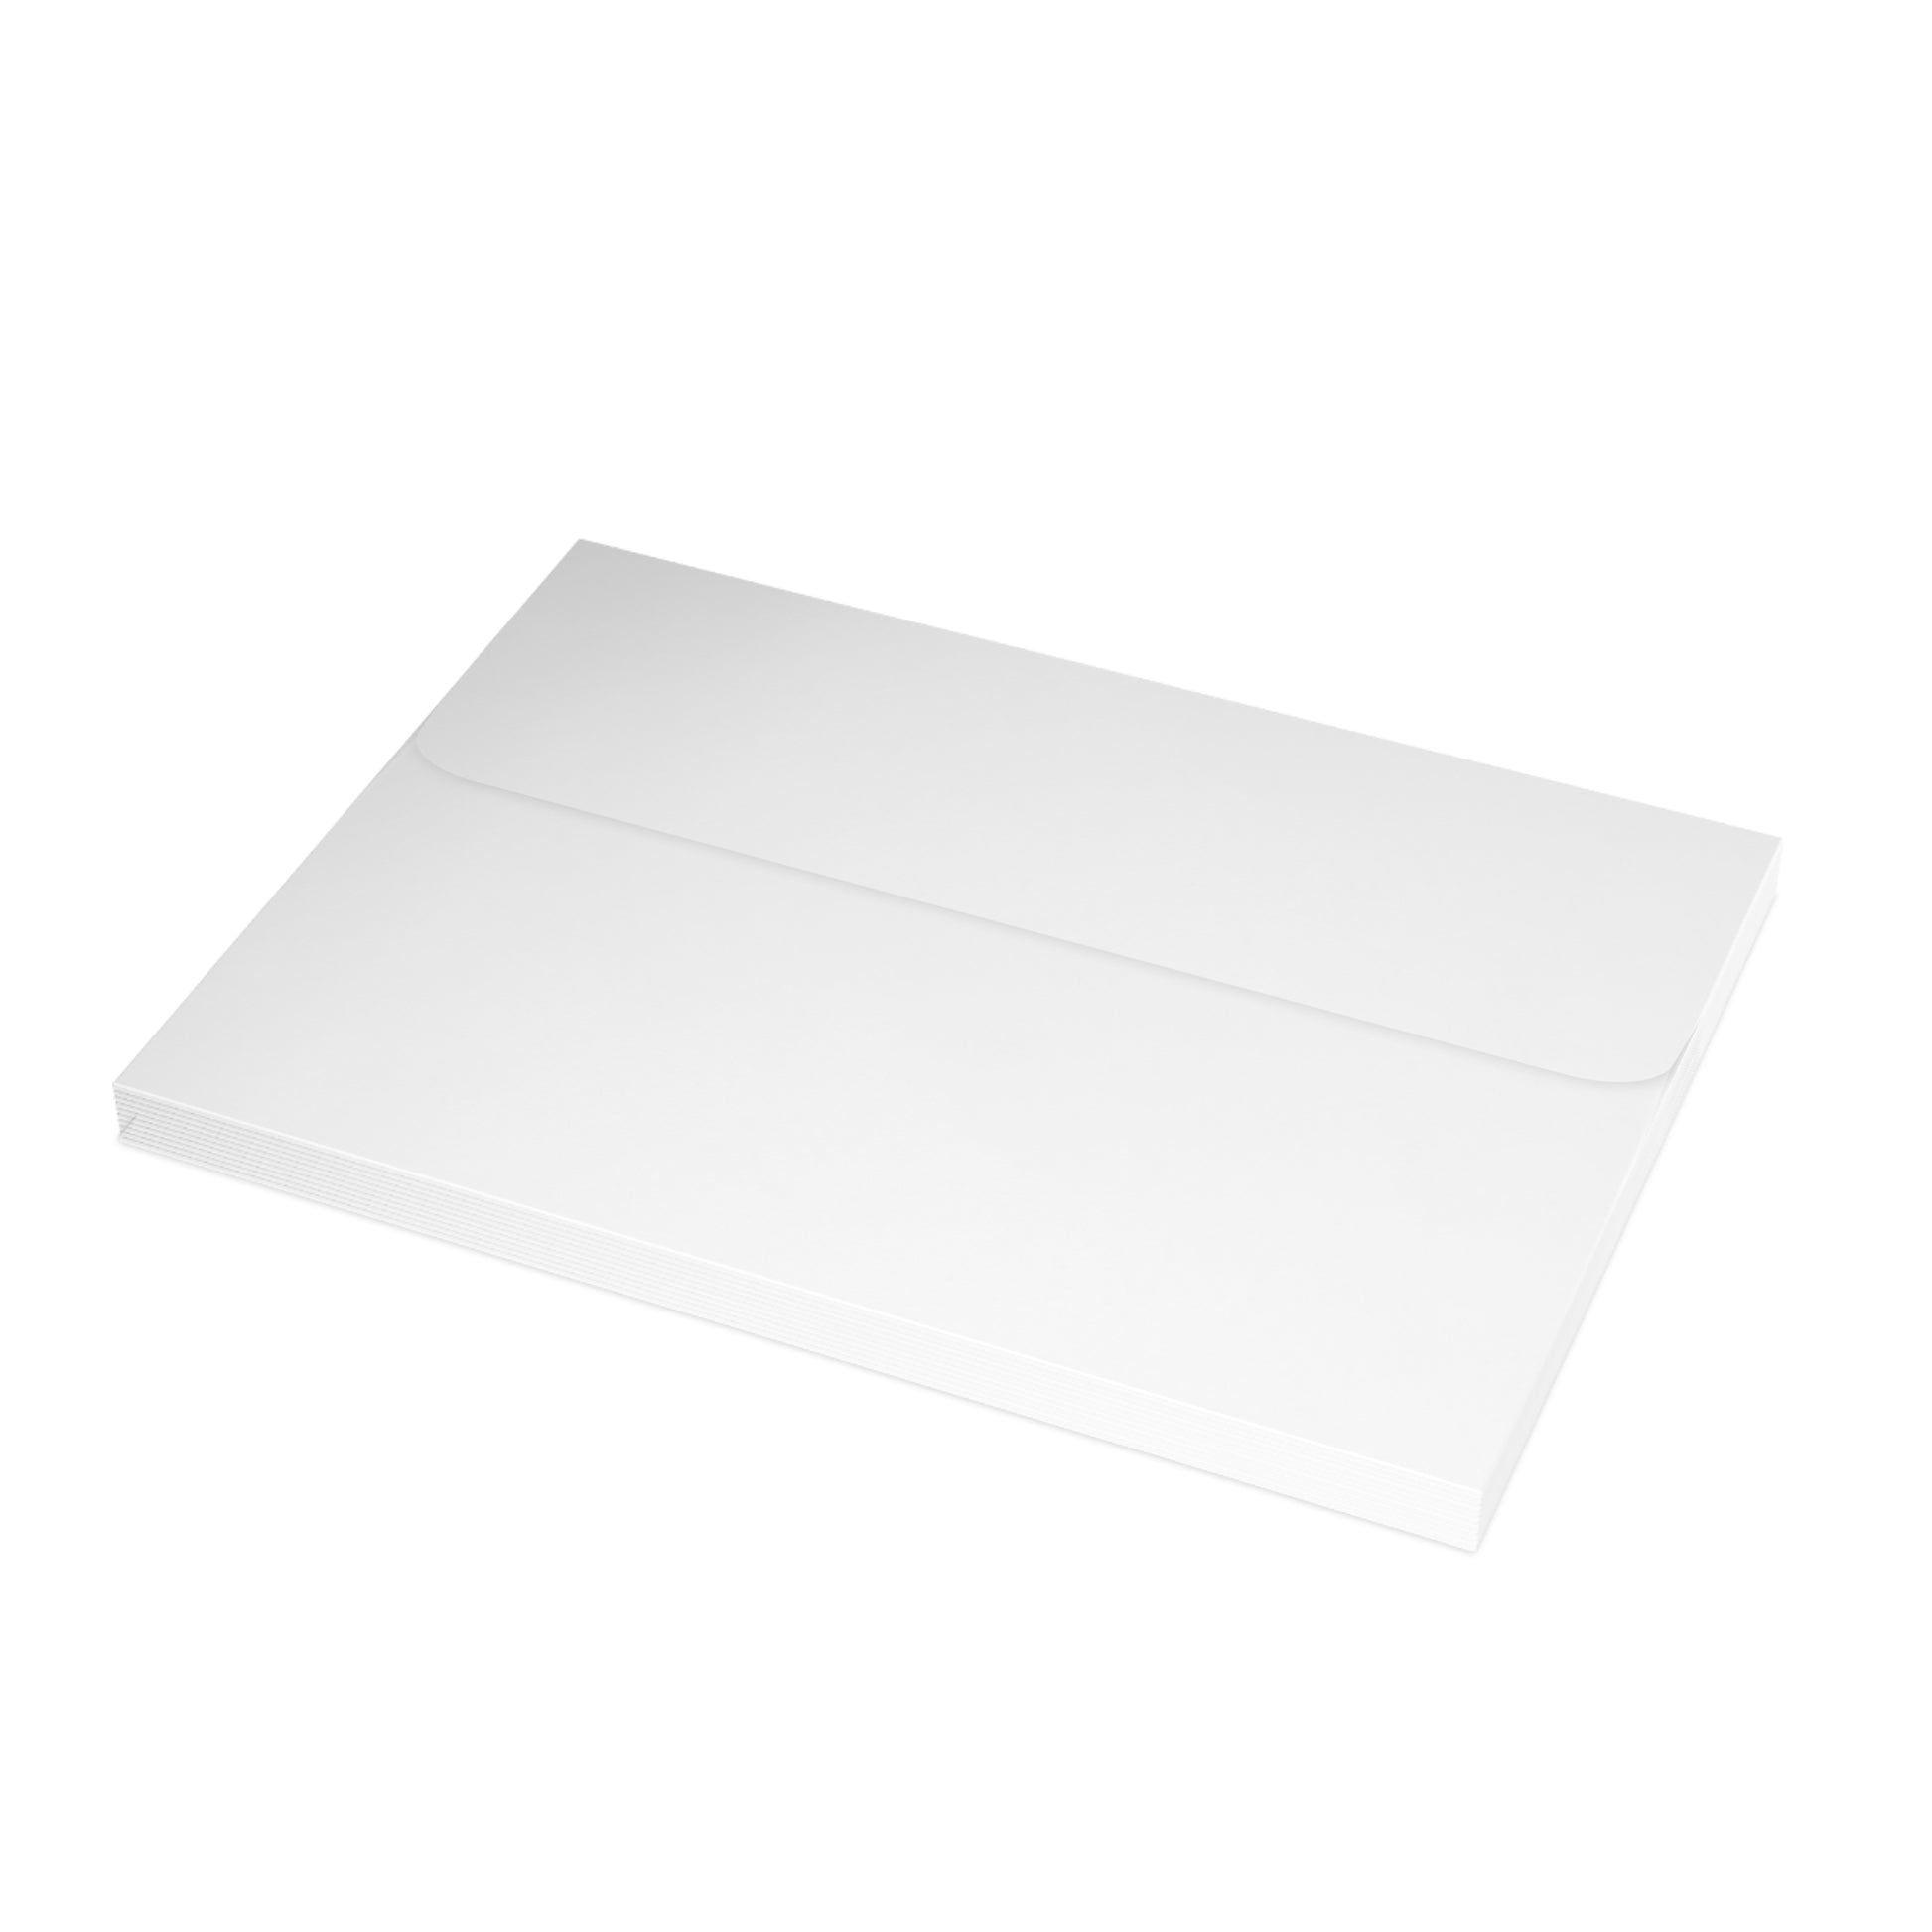 image of envelopes included with holiday cards